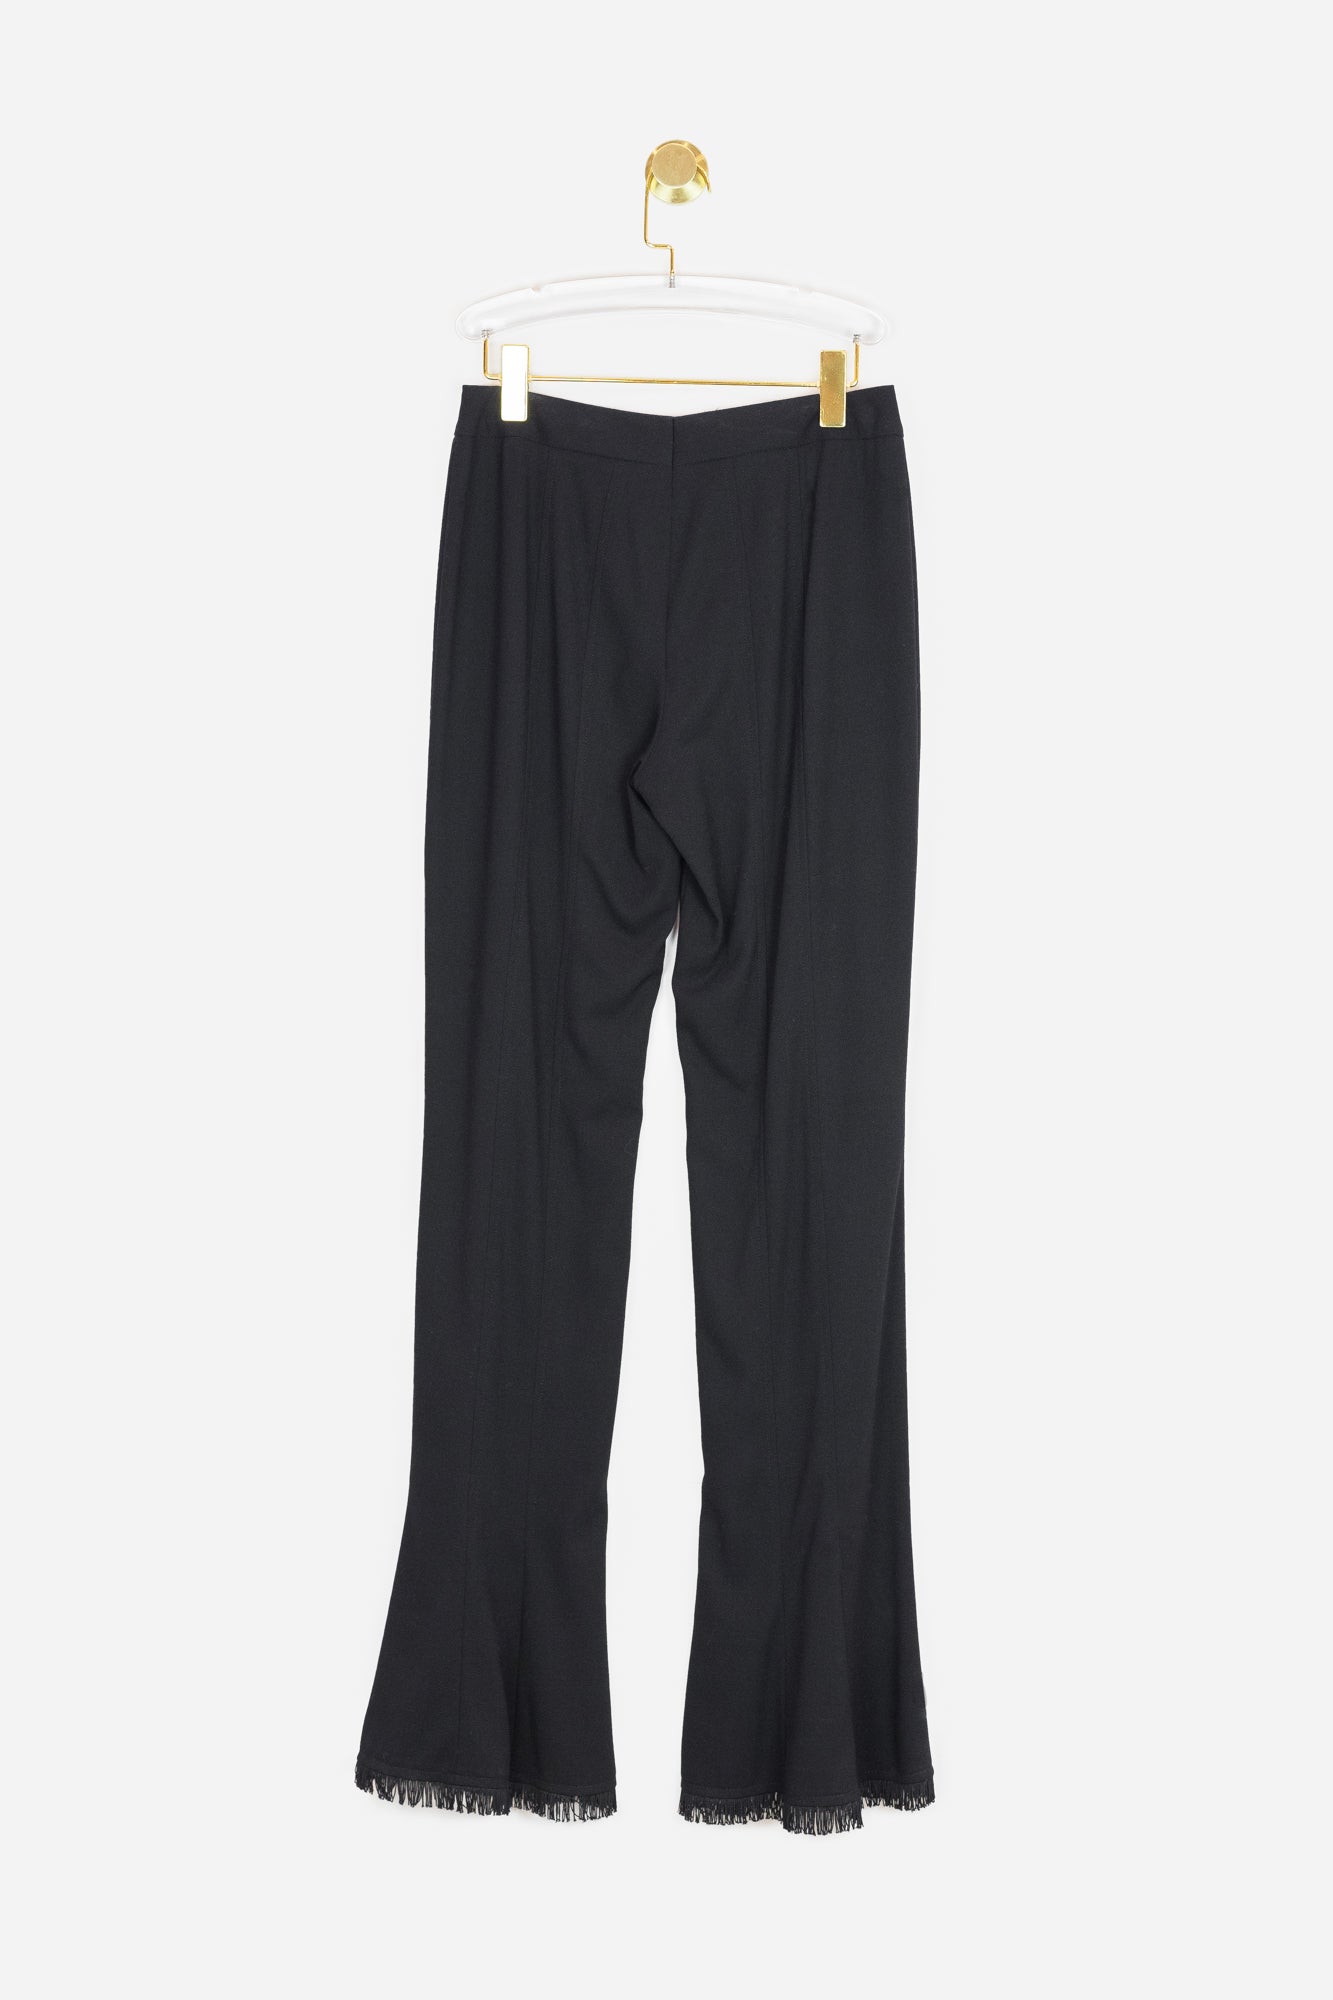 Black Flared Trousers with Fringe Details - So Over It Luxury Consignment